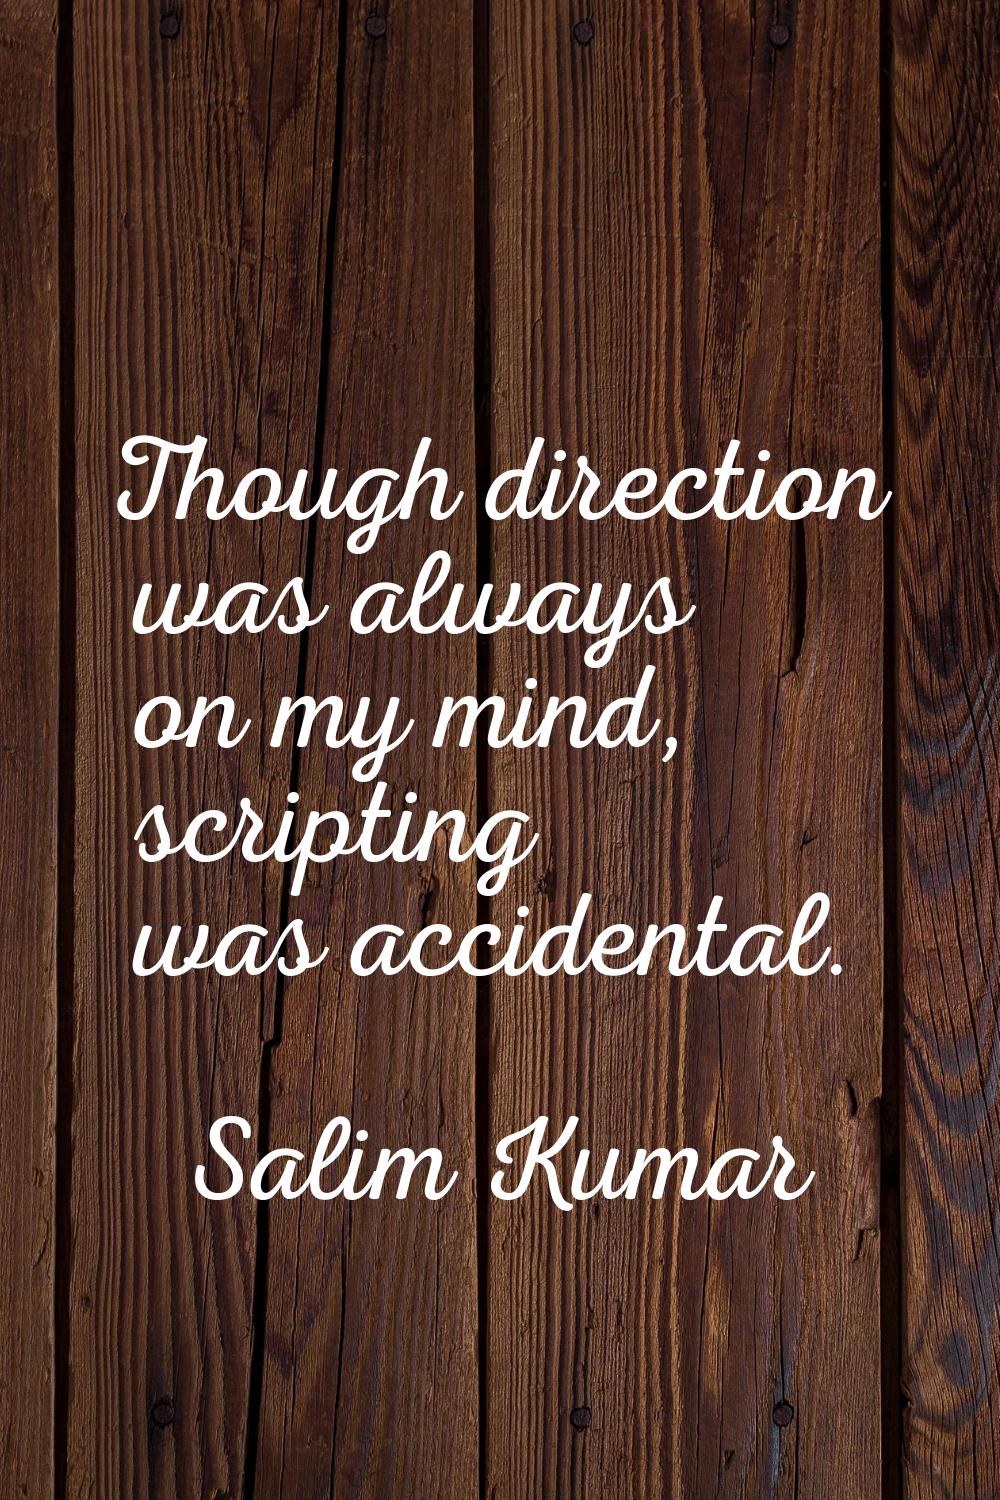 Though direction was always on my mind, scripting was accidental.